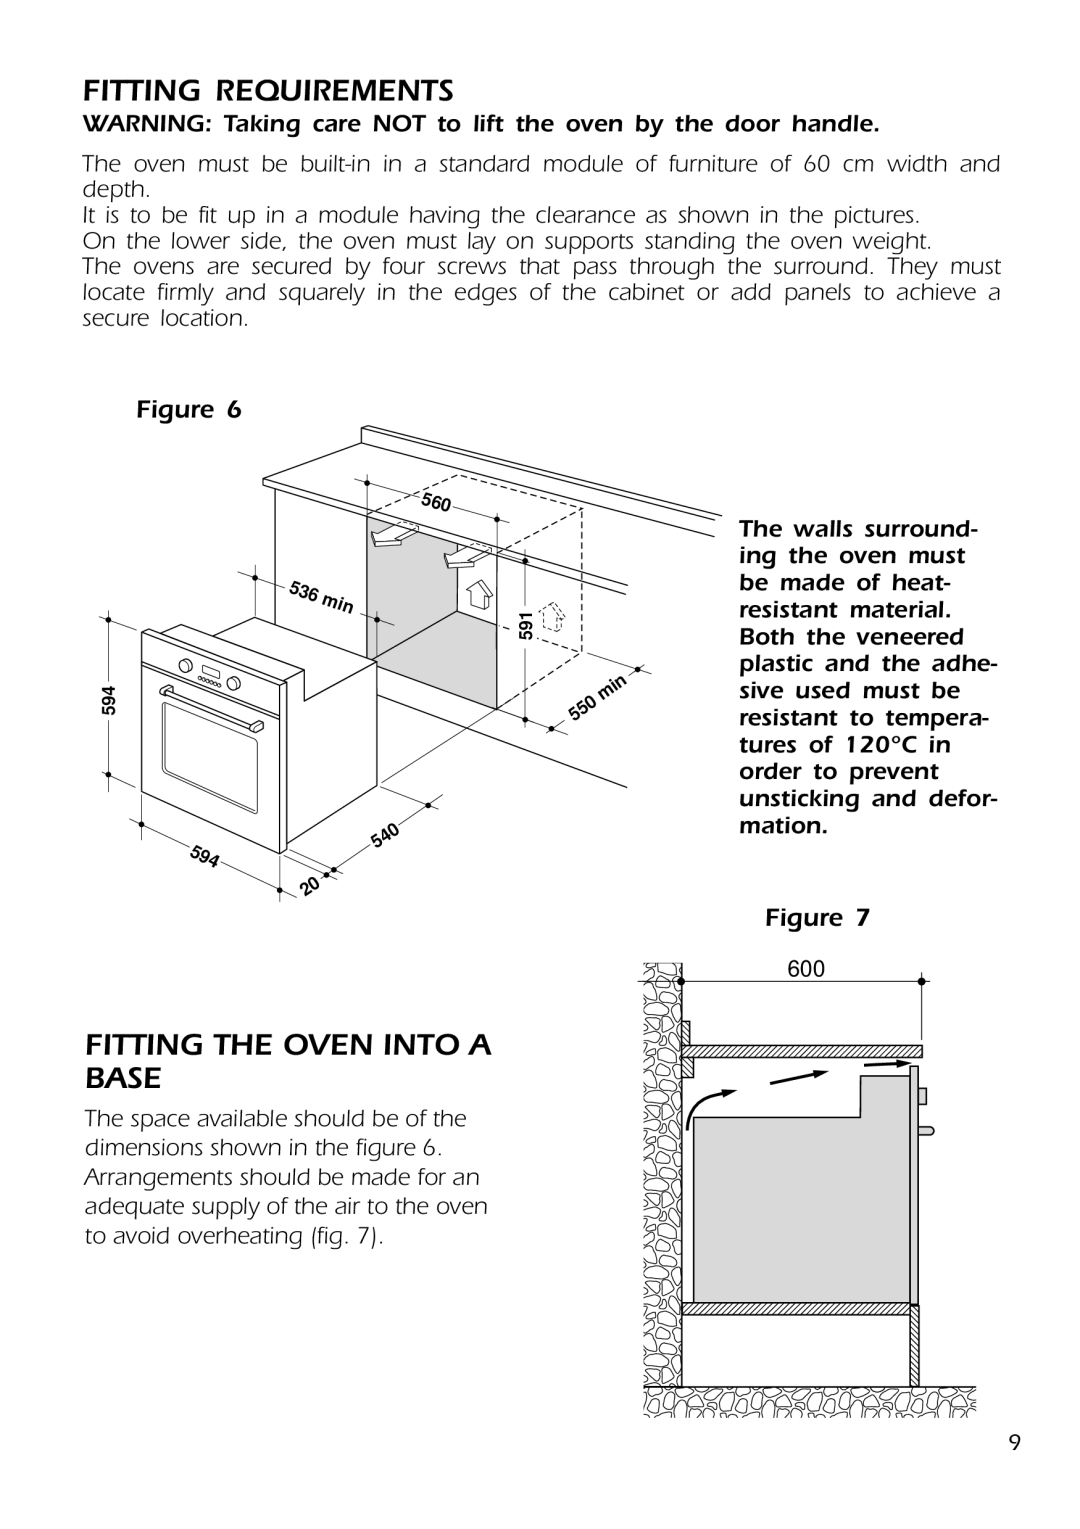 DeLonghi DMFPSII manual Fitting Requirements, Fitting The Oven Into A Base 